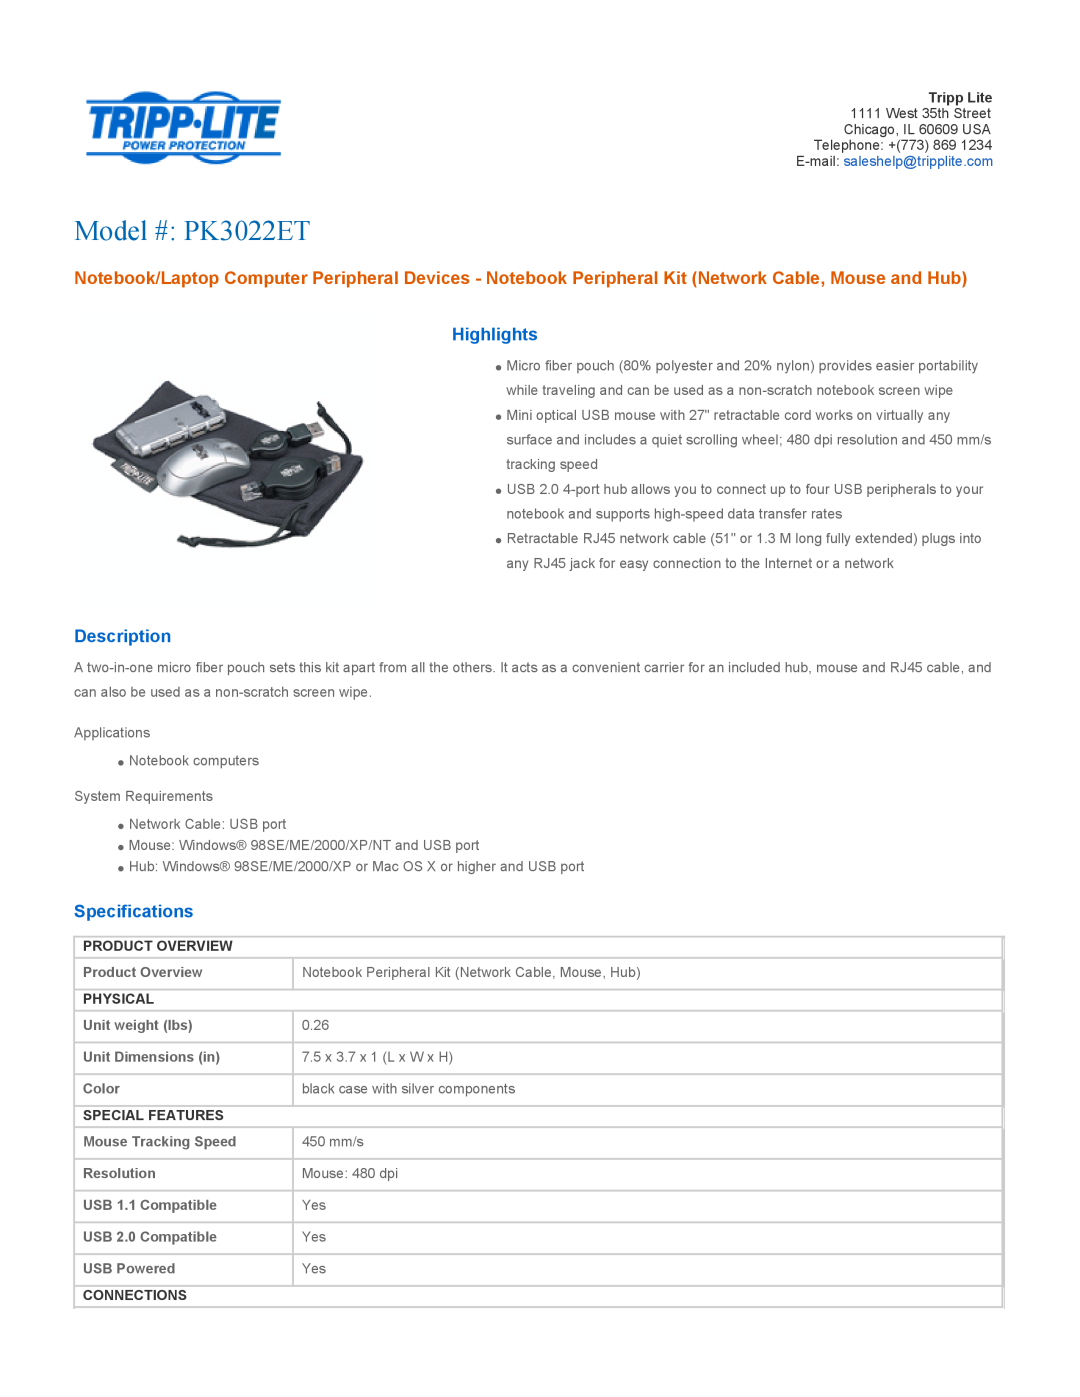 Tripp Lite specifications Product Overview, Physical, Special Features, Connections, Model # PK3022ET, Highlights 